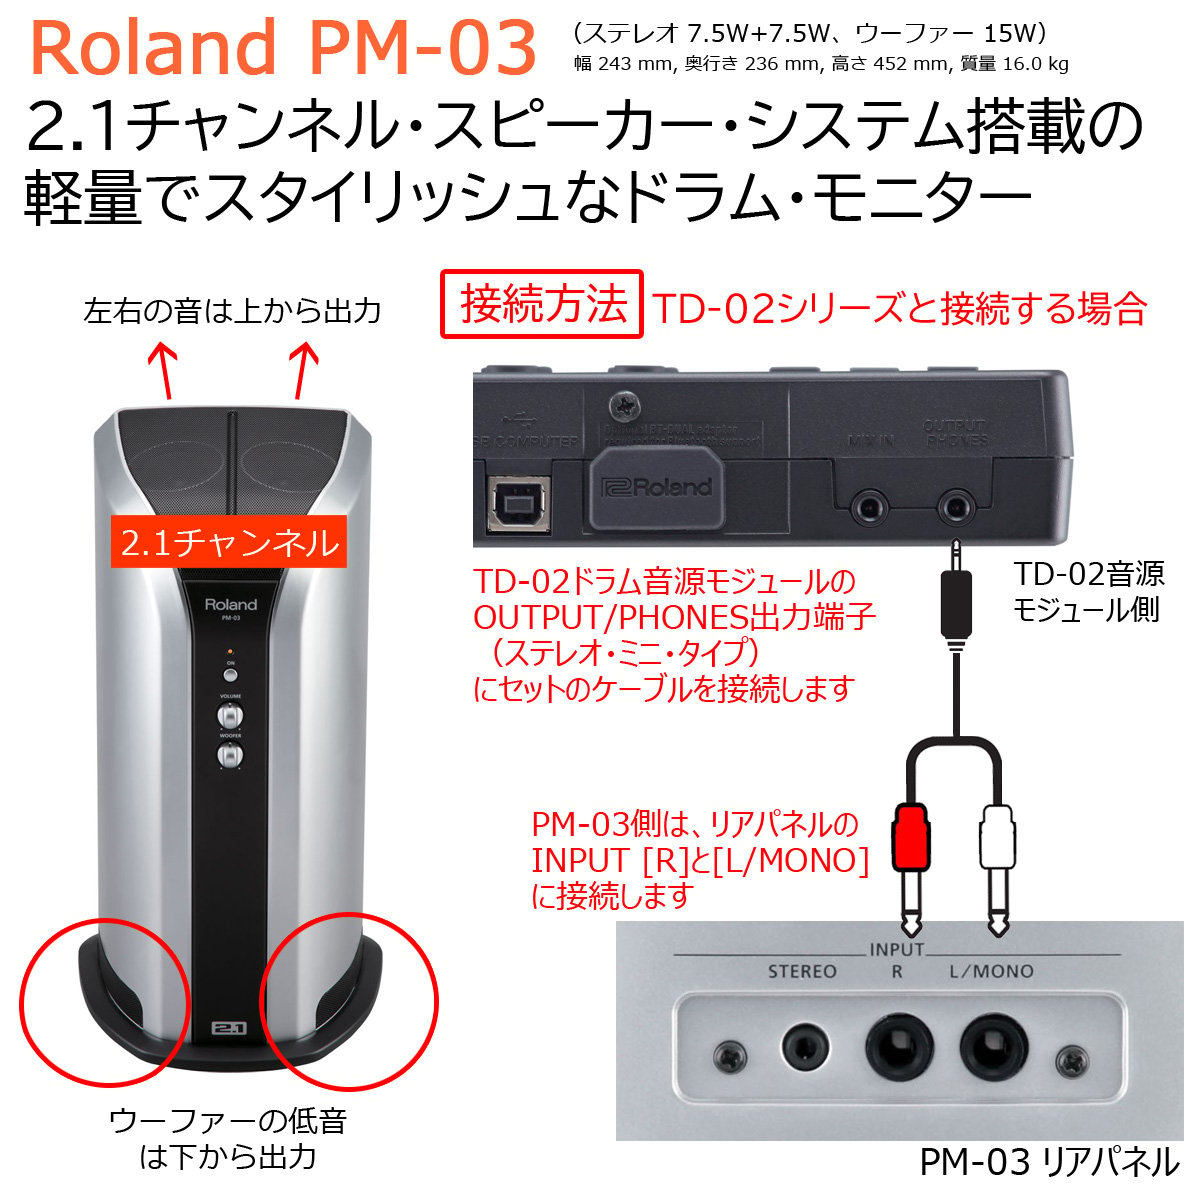 Roland / PM-03 electronic drum for personal monitor connection for mi varnish teY character cable (3m) set (TD-1/TD-02/TD-07 correspondence )